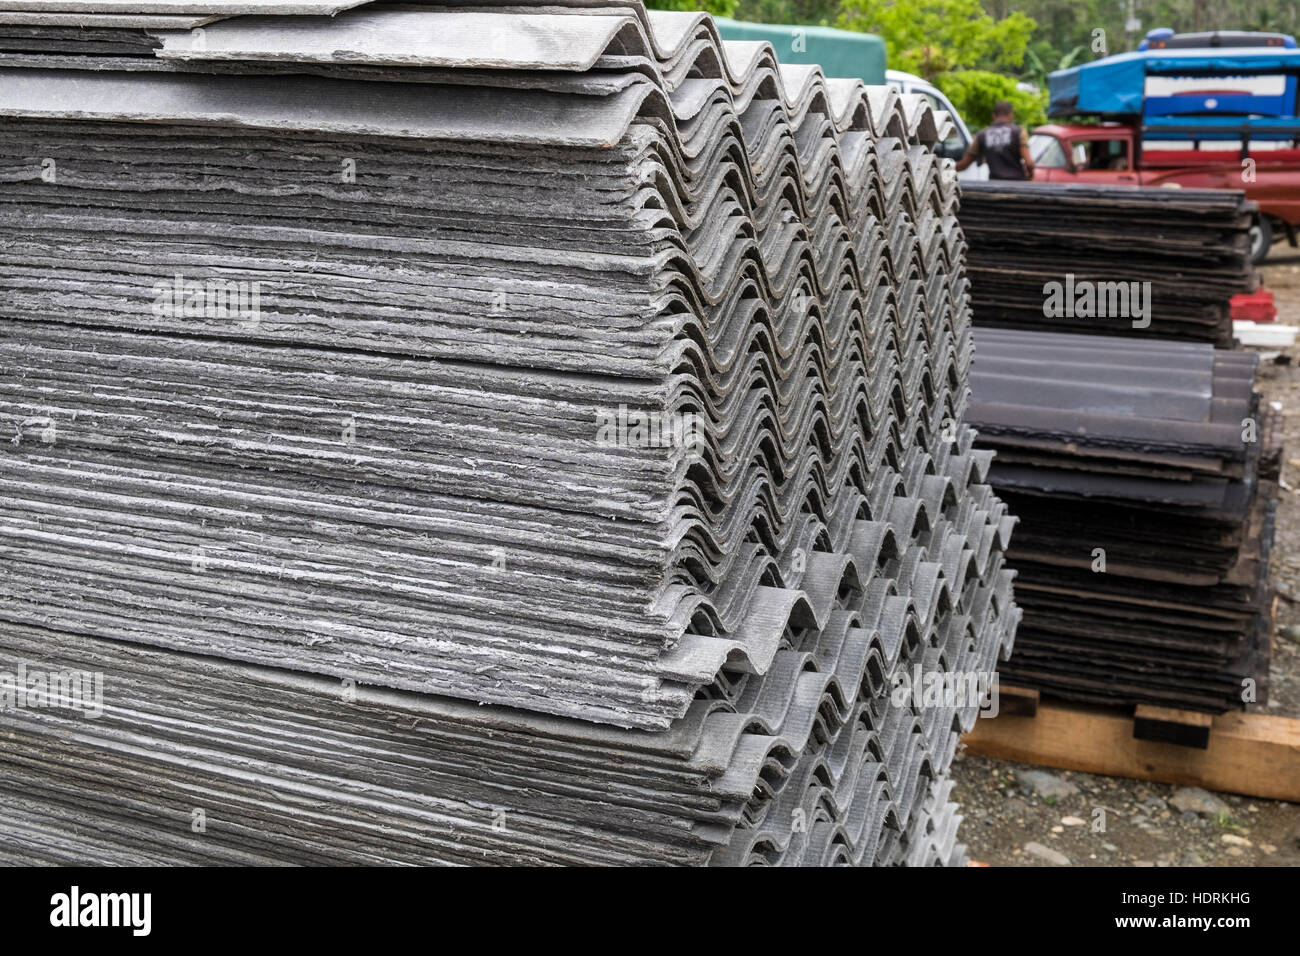 Asbestos corrugated sheeting for roofing piled up ready for distribution to people affected by hurricane Mathew in Baracoa, Cuba Stock Photo